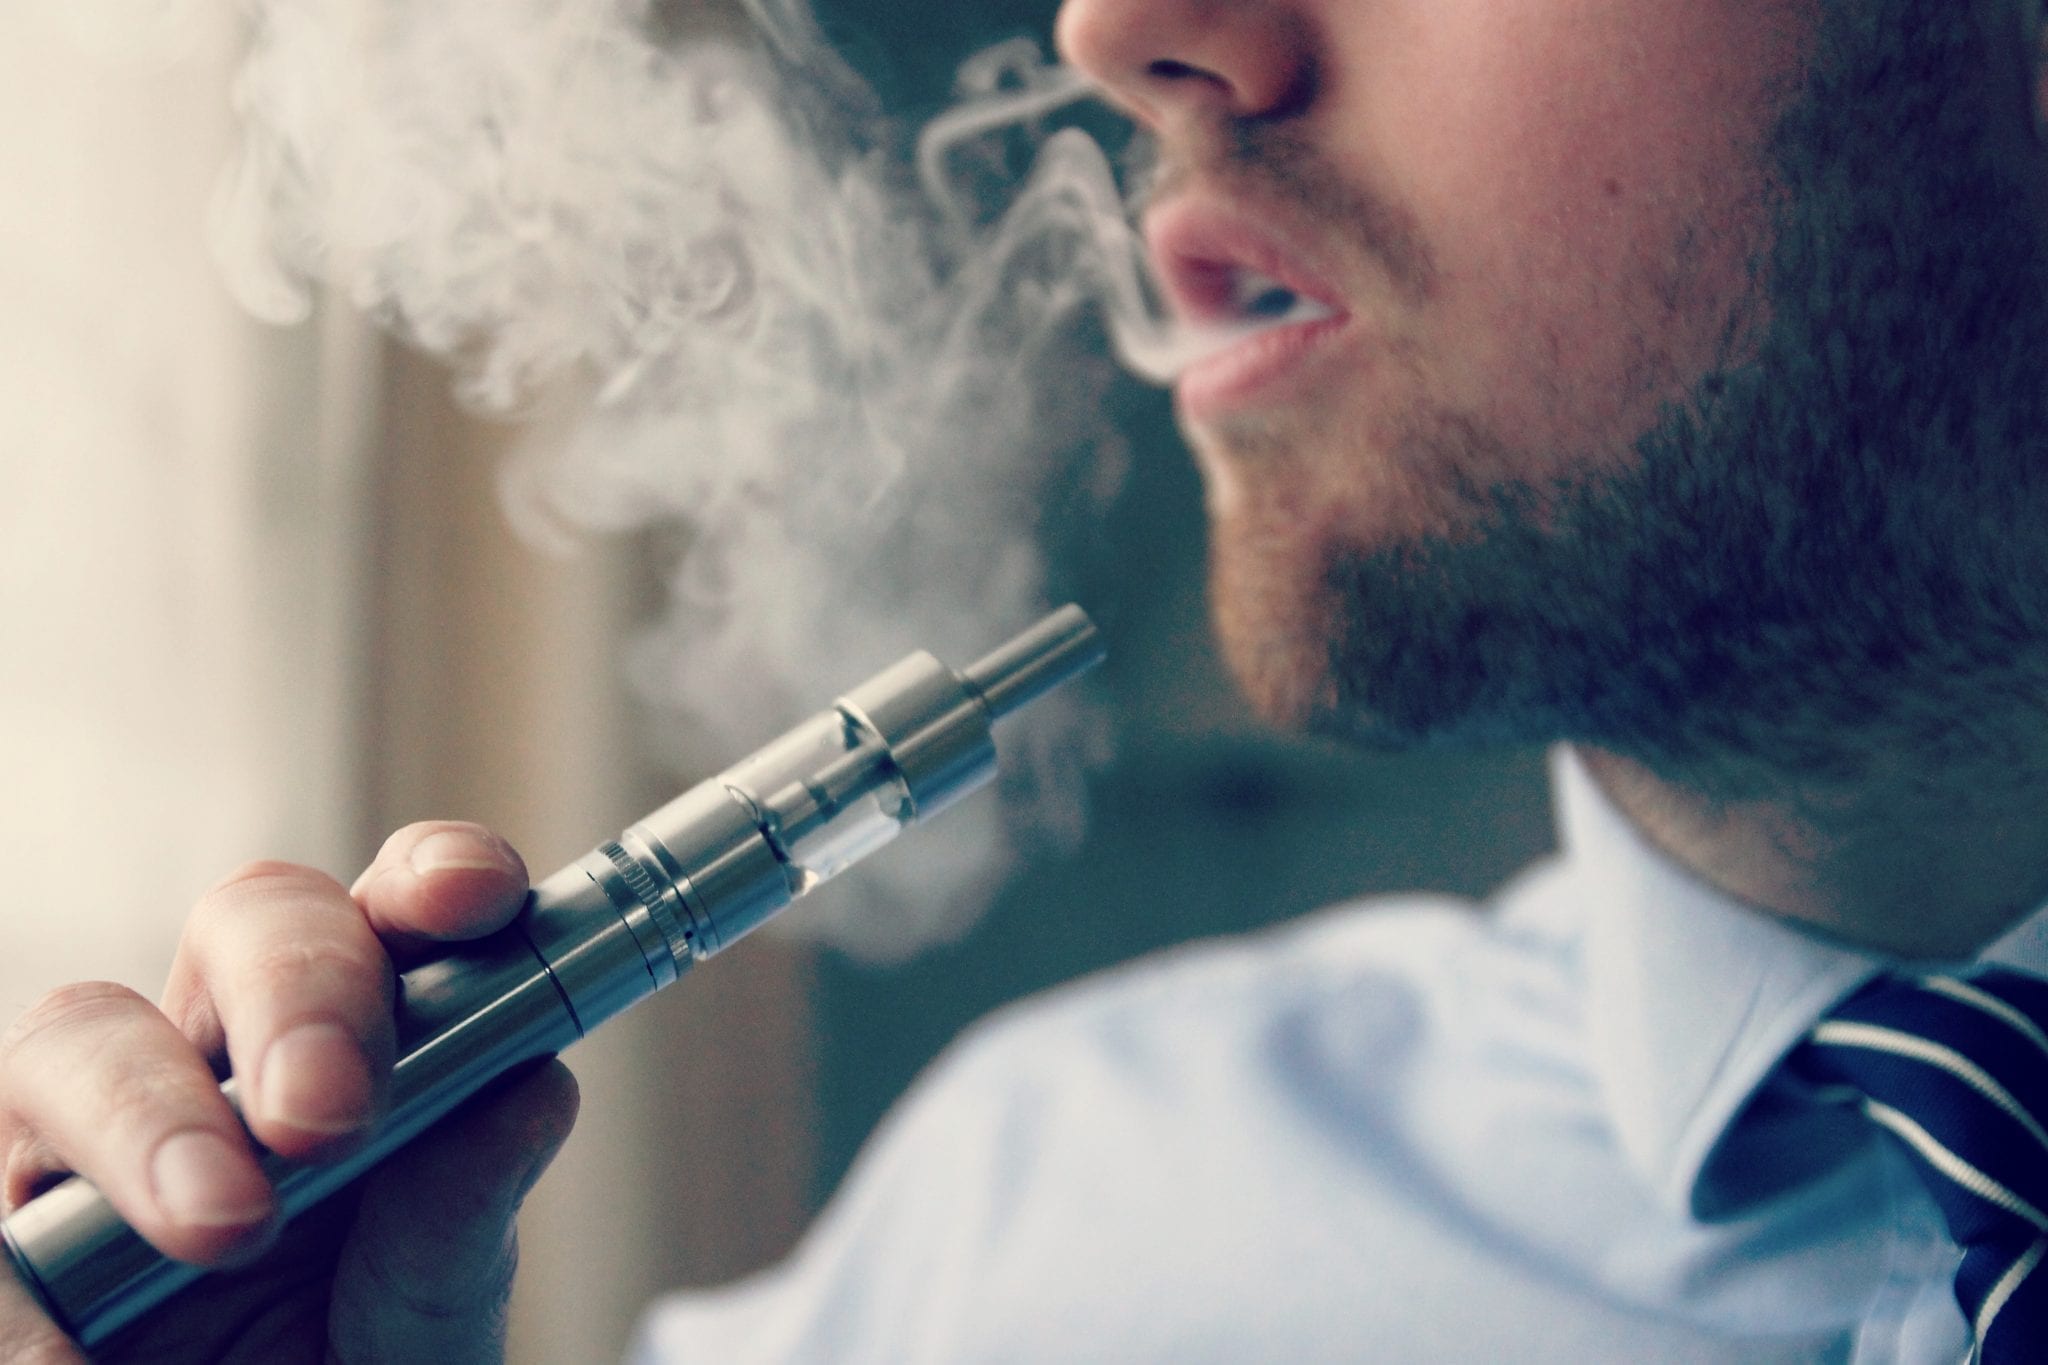 Man vaping; image by Vaping360, via Flickr, CC BY-ND 2.0, no changes.